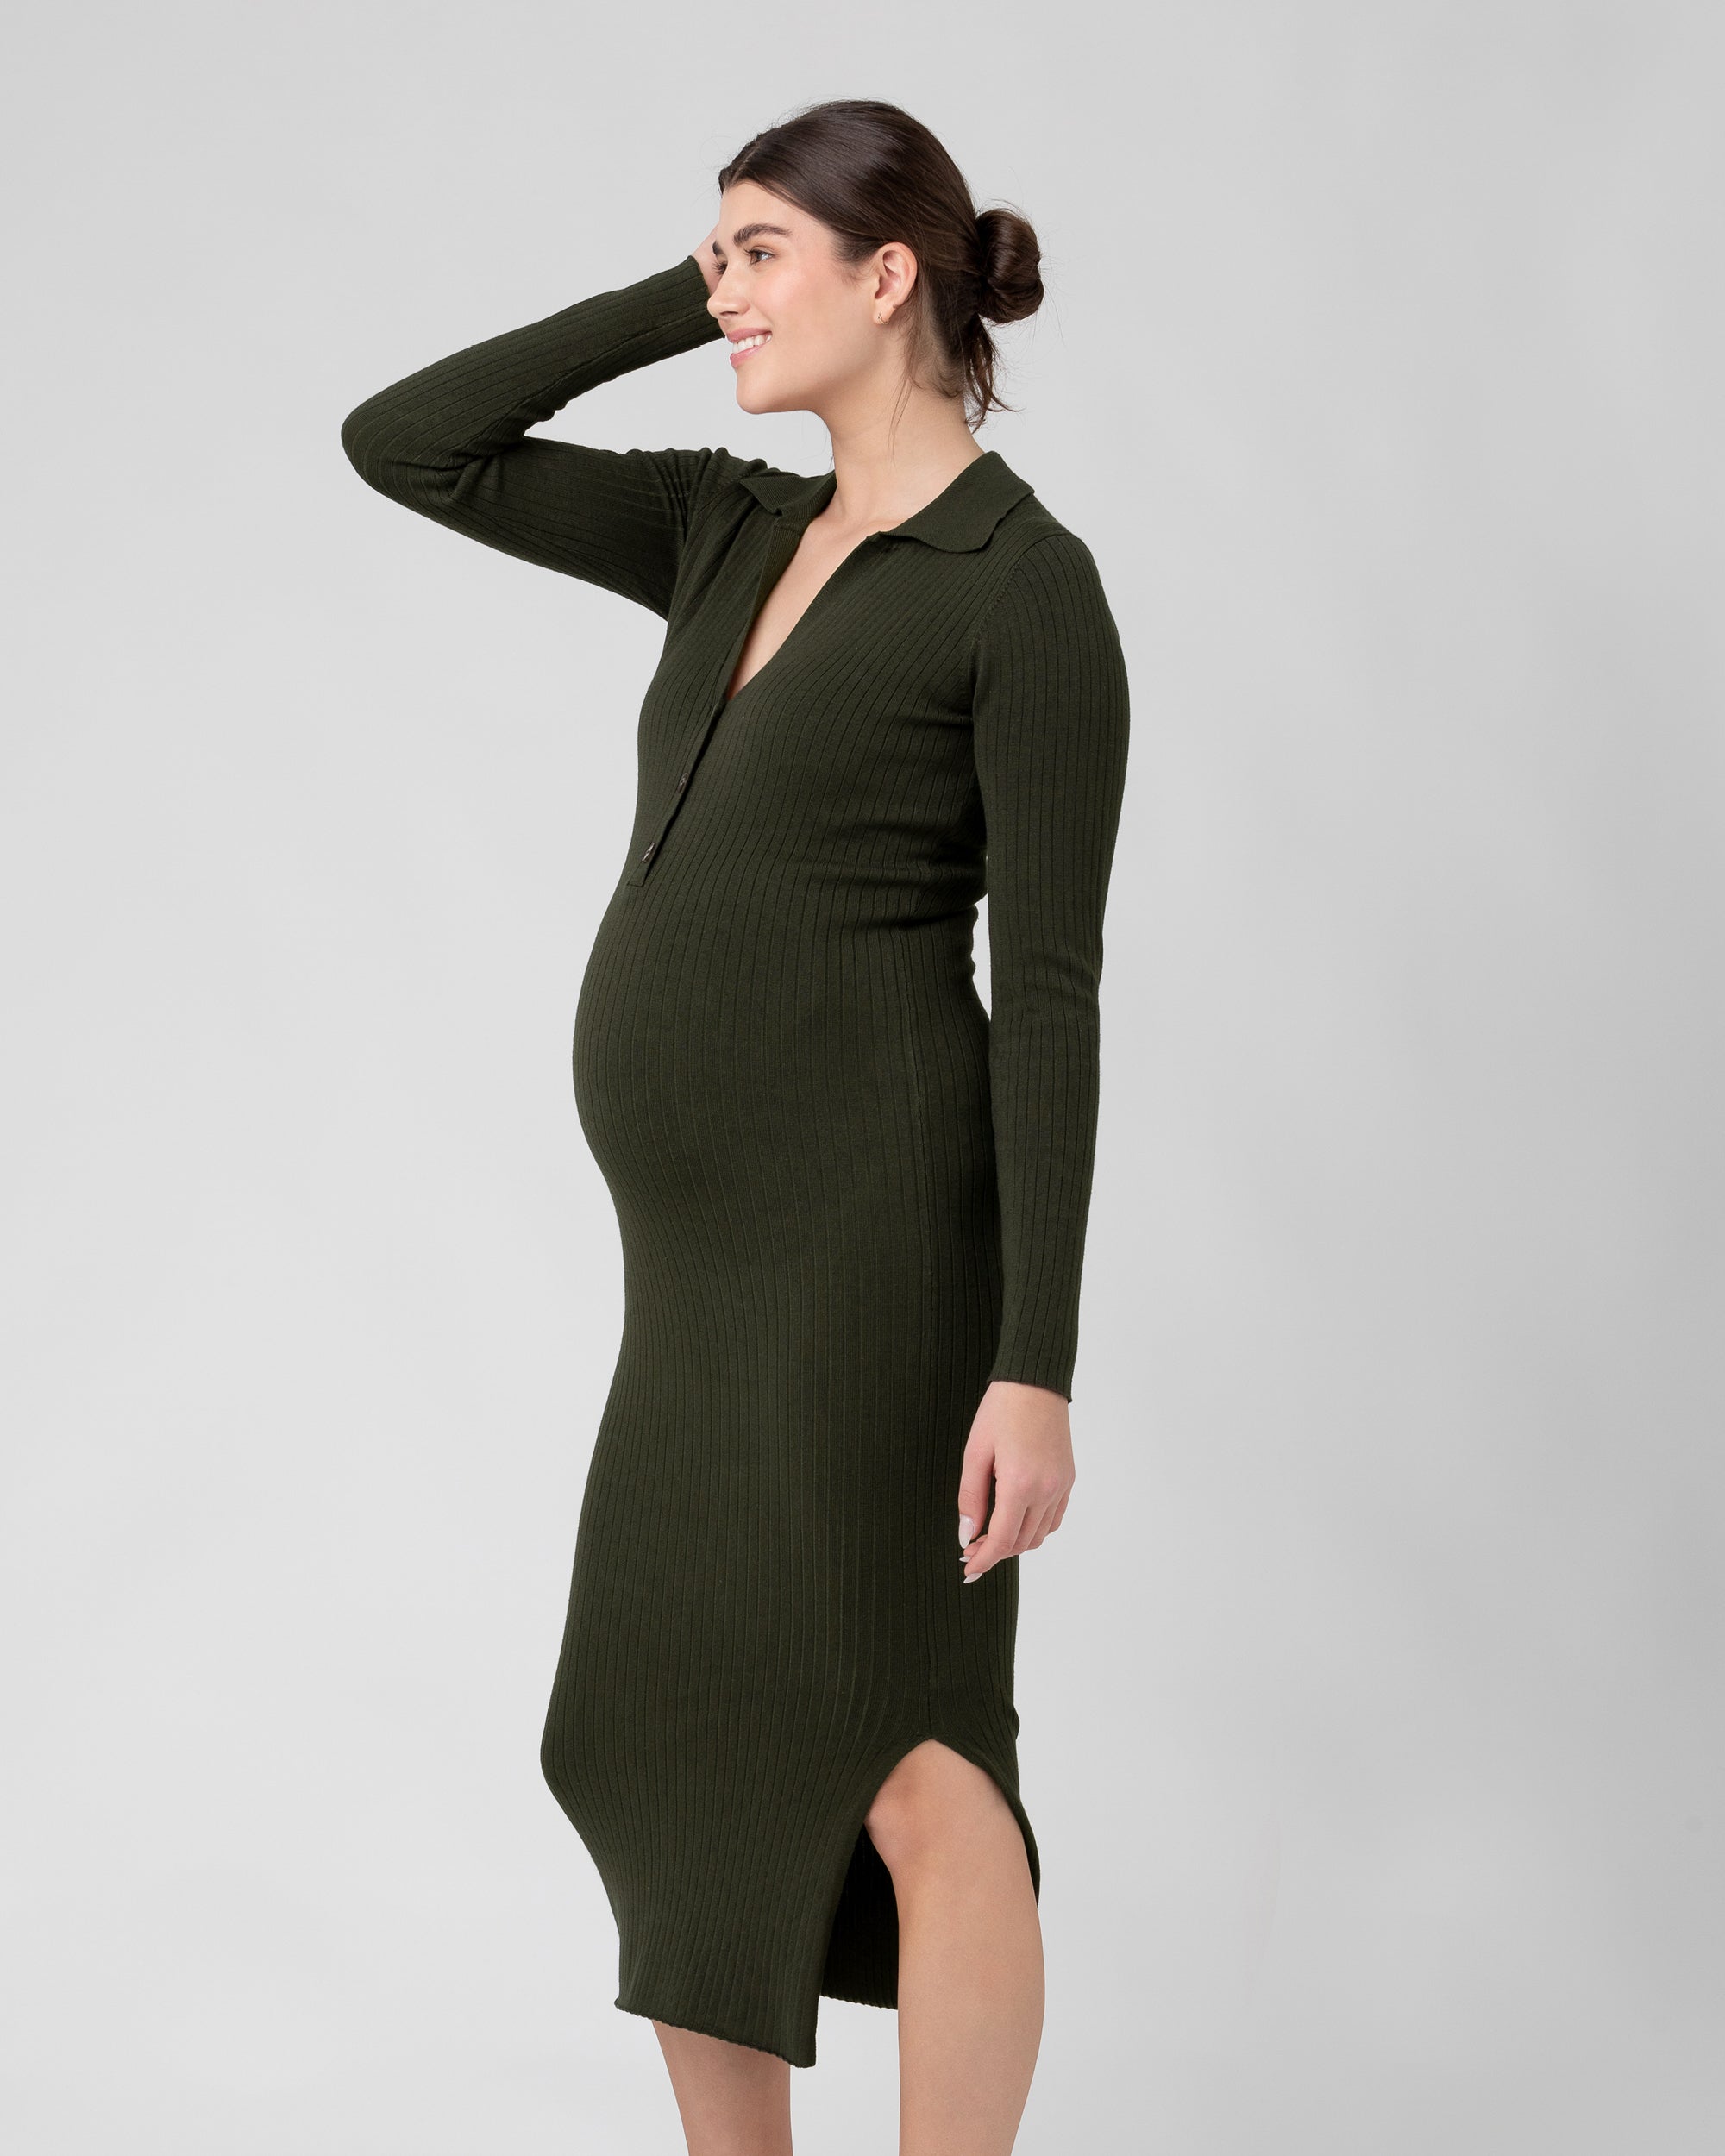 SALE! Nella Rib Knit Dress in Ivy by Ripe Maternity – Special Addition